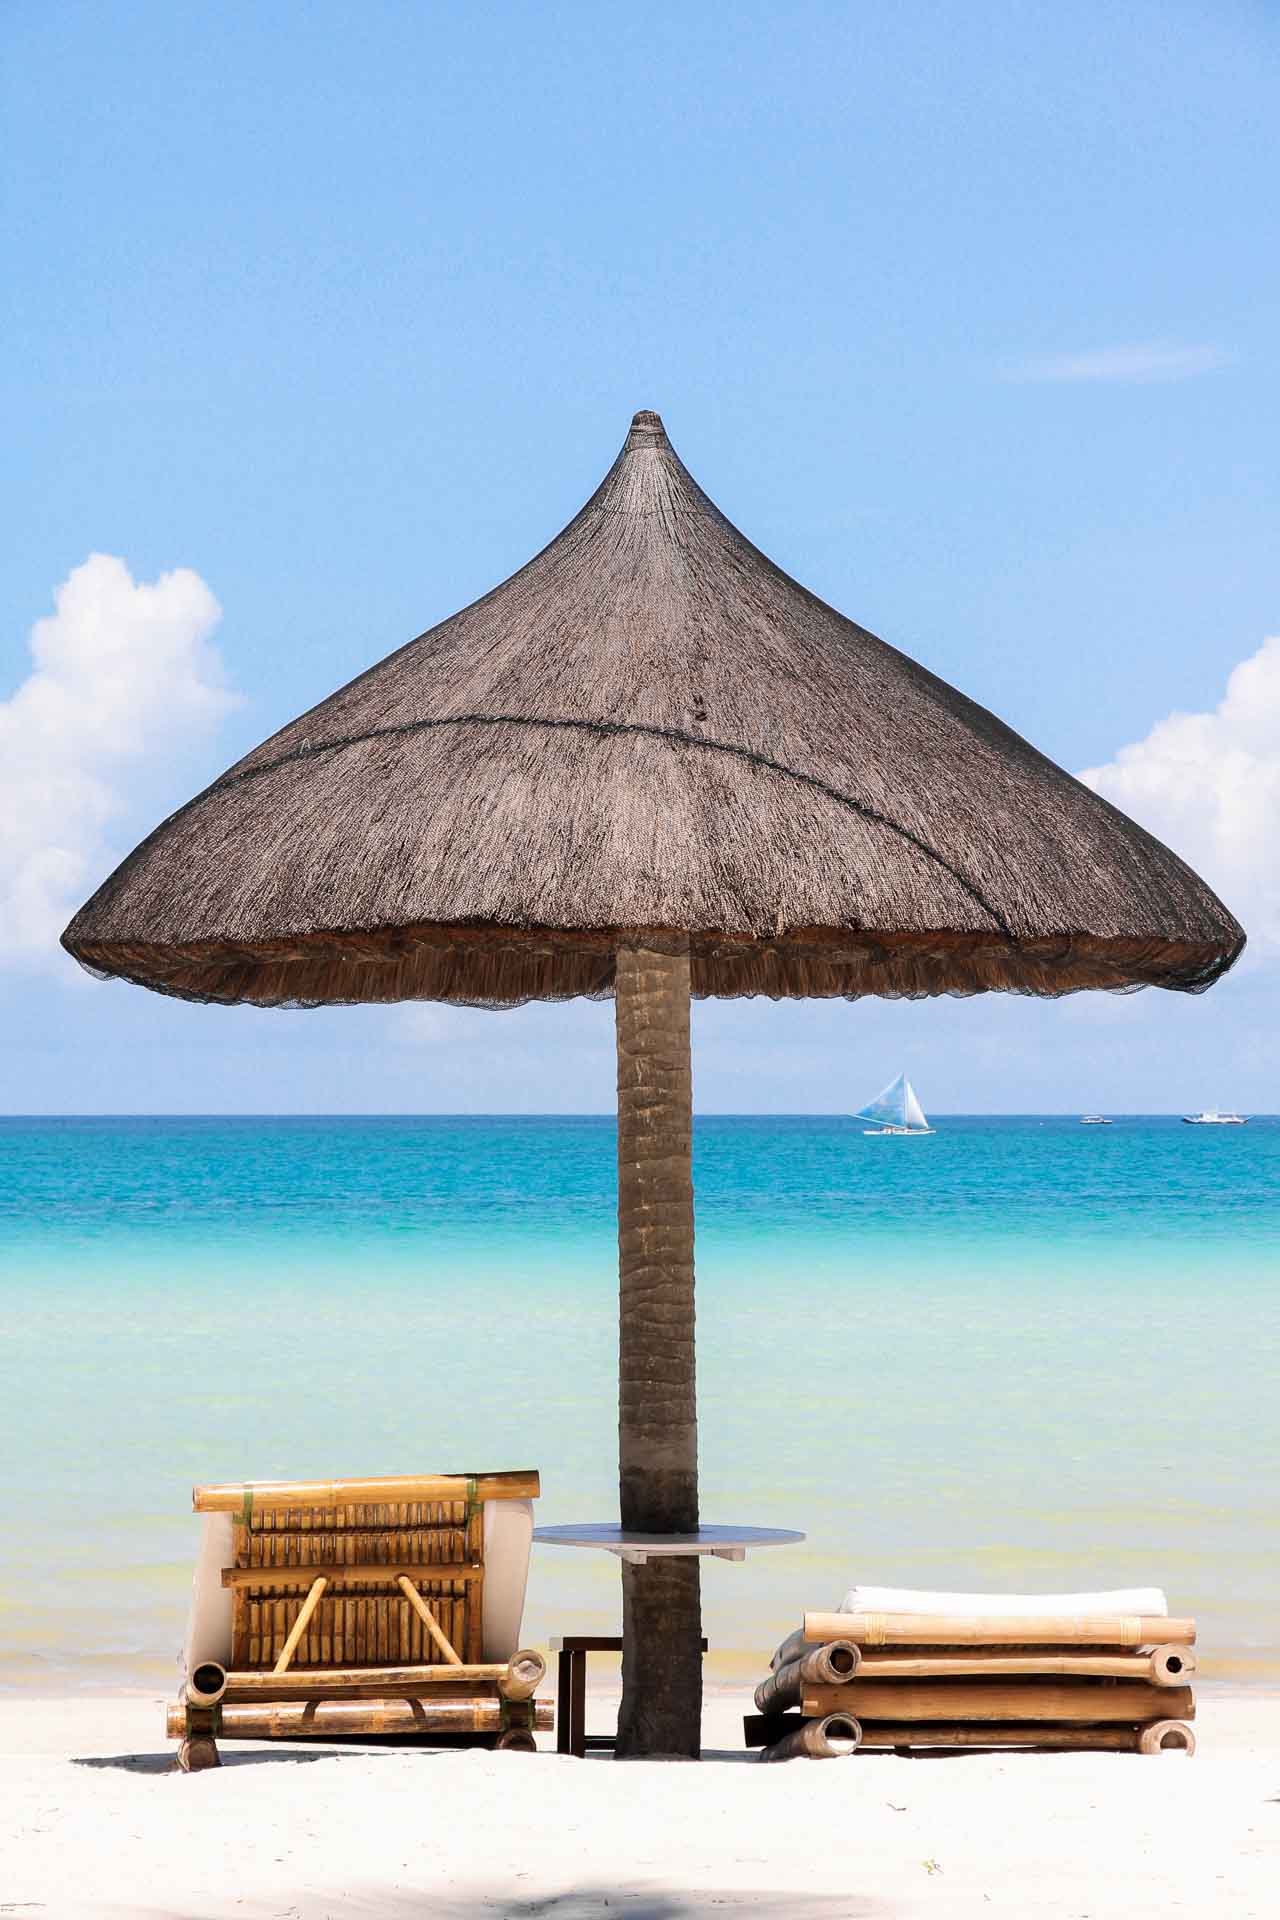 Thatched umbrella and sun loungers on tropical beach with sail boats in background